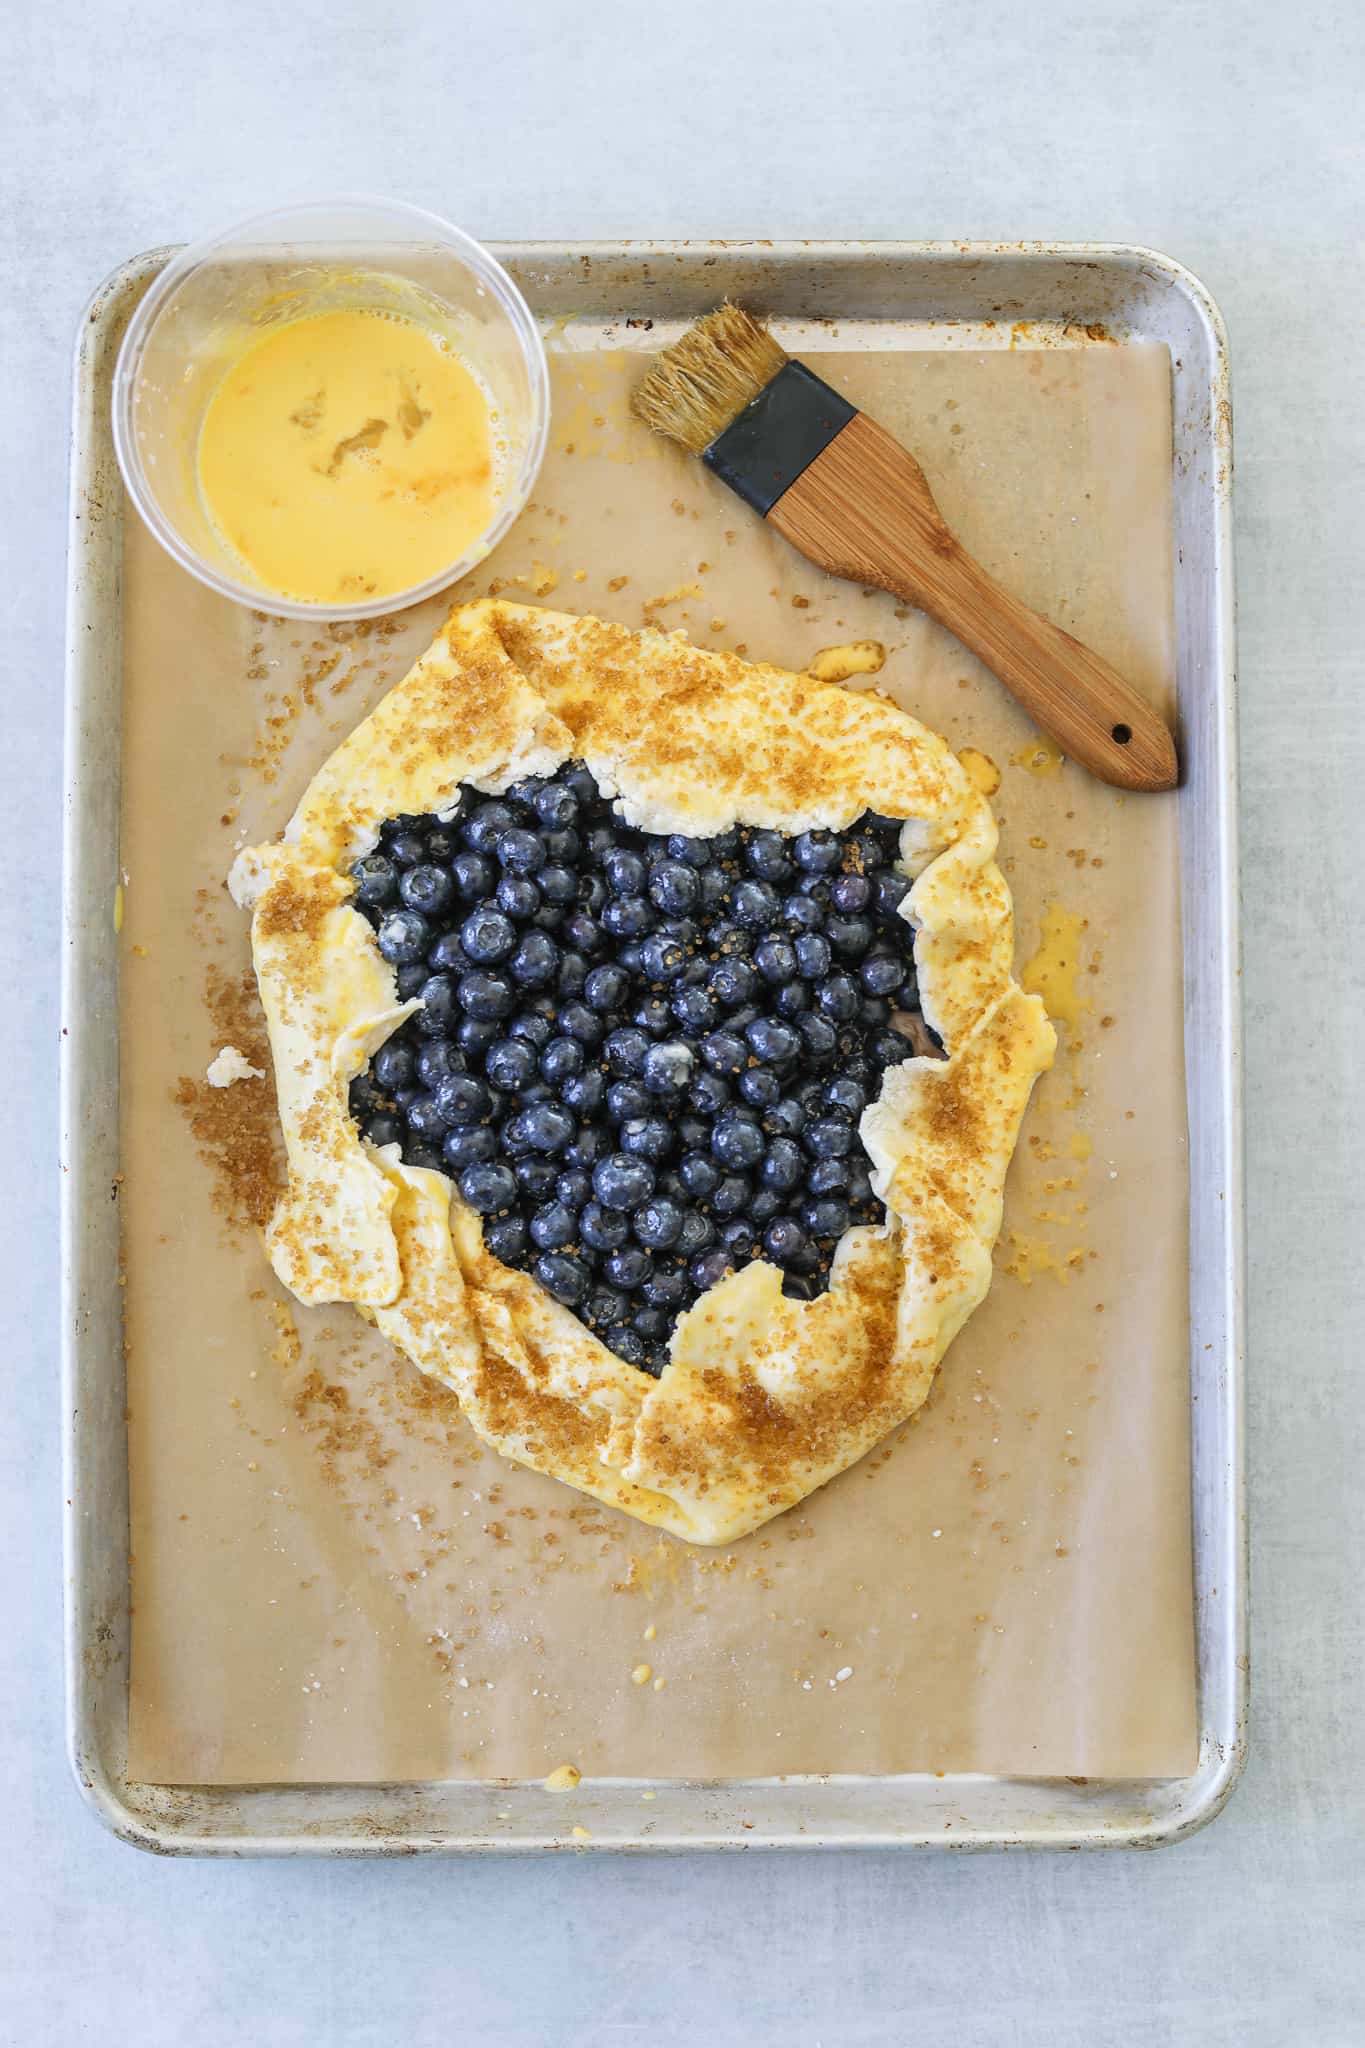 uncooked blueberry galette on a baking tray